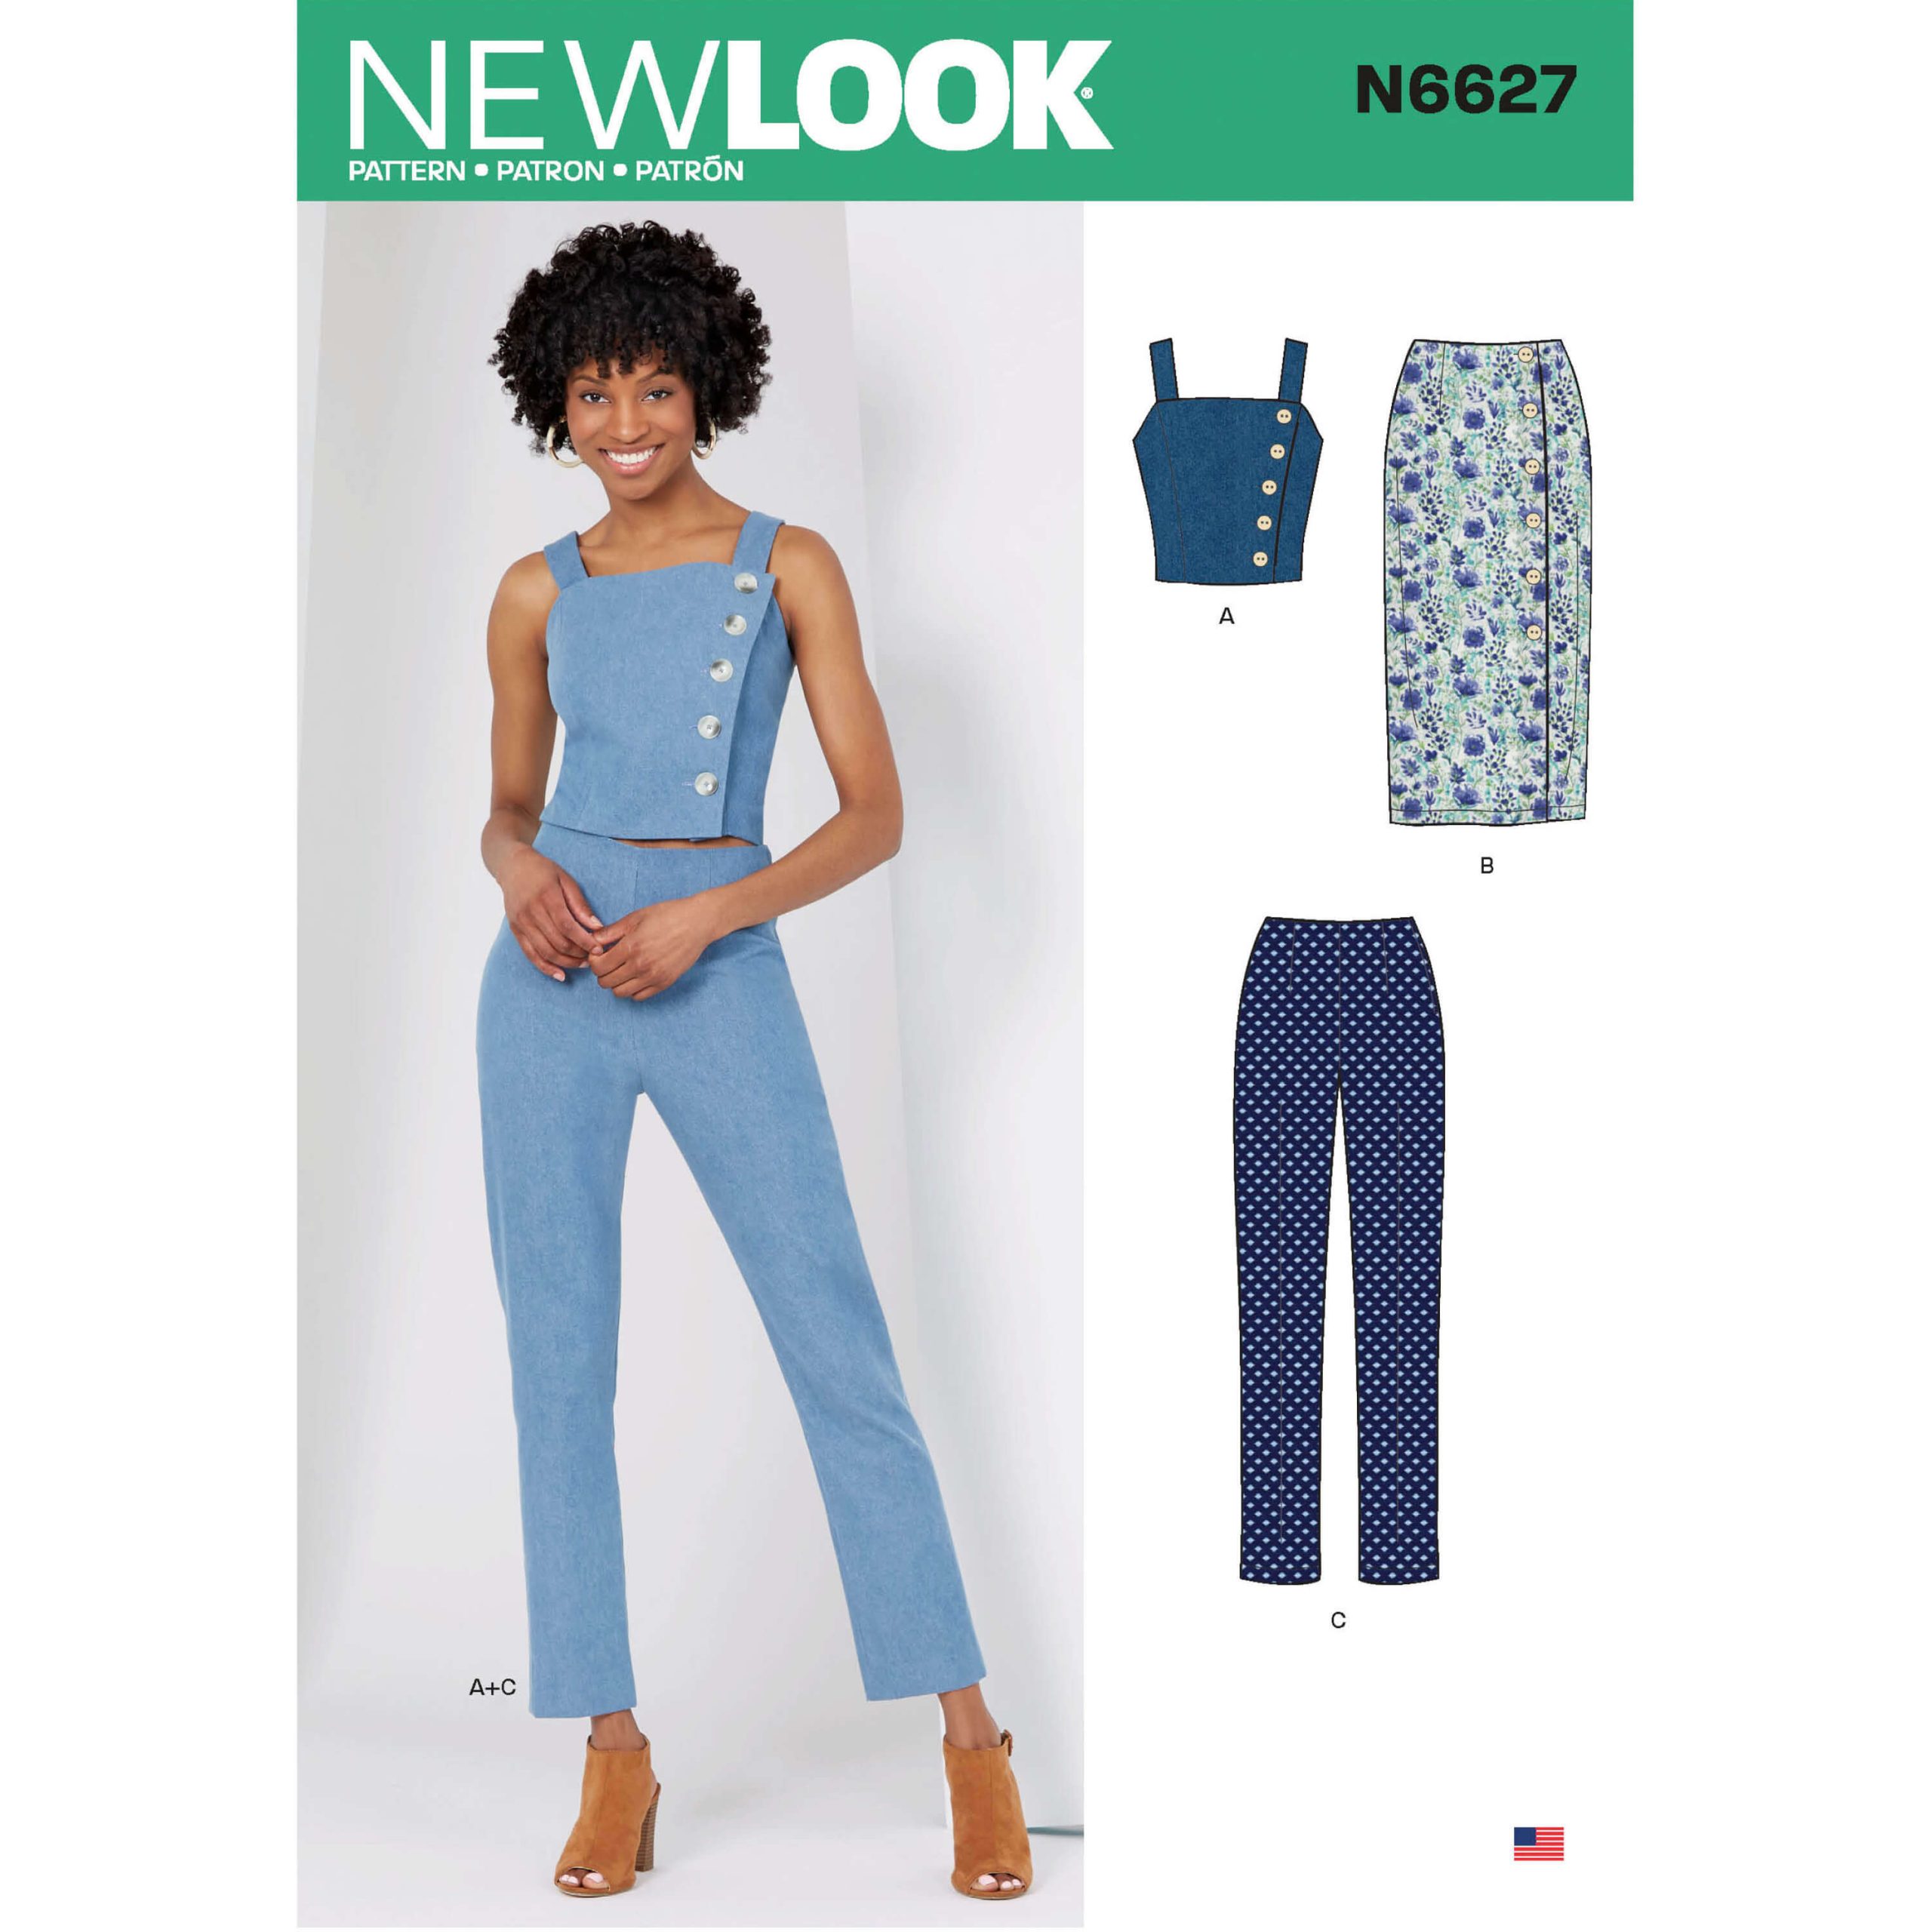 New Look Sewing Pattern N6627 Misses' Top, Skirt, And Pants